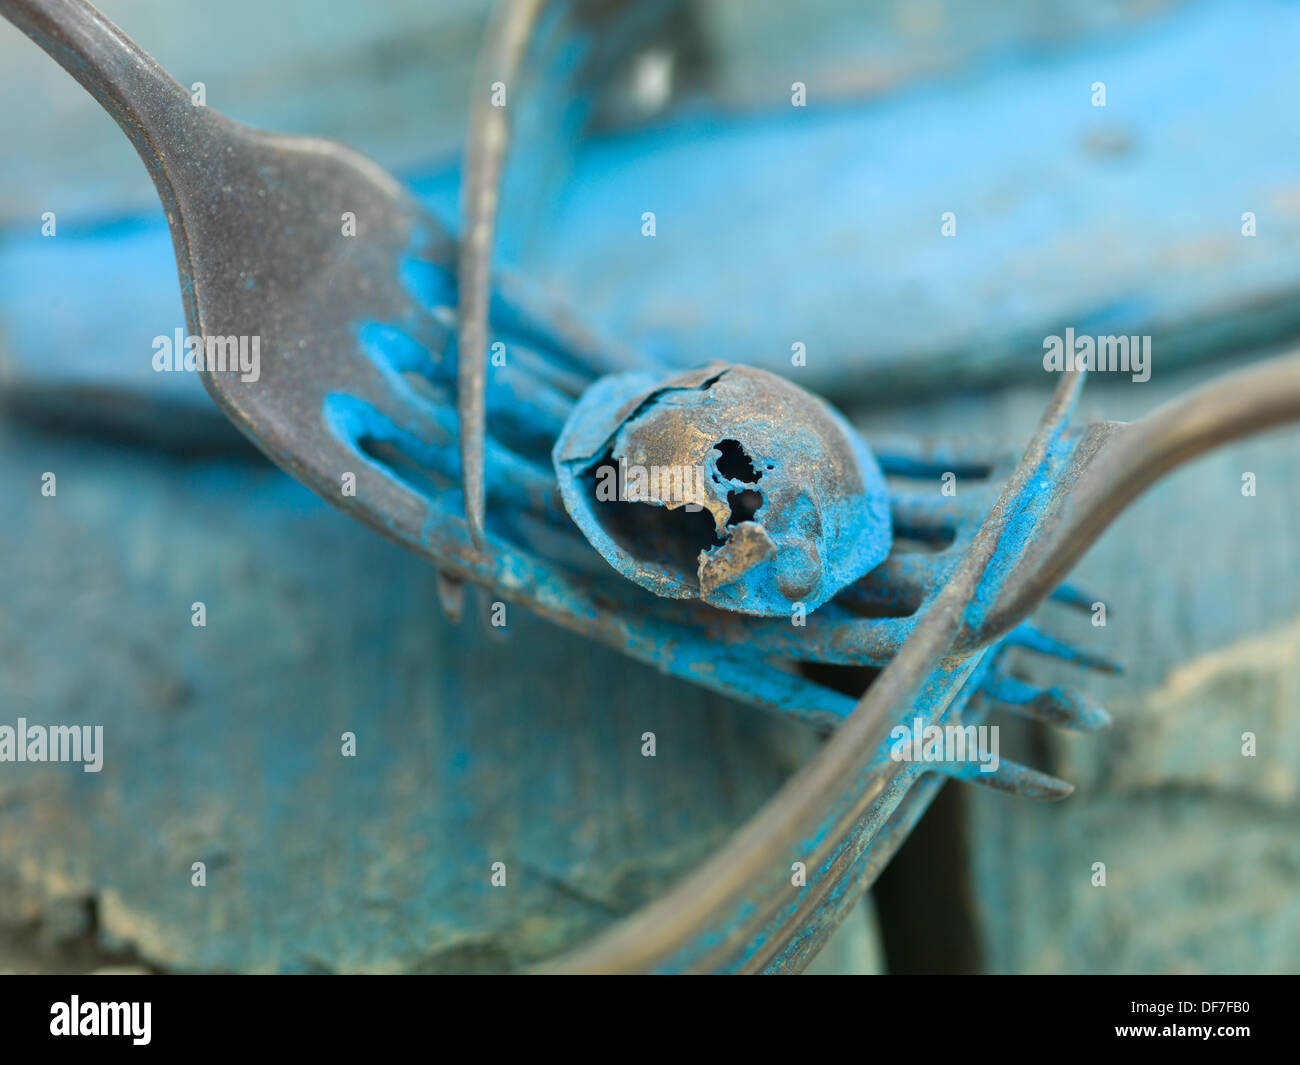 macro of a contemporary artwork made out of forks, metal and blue paint Stock Photo